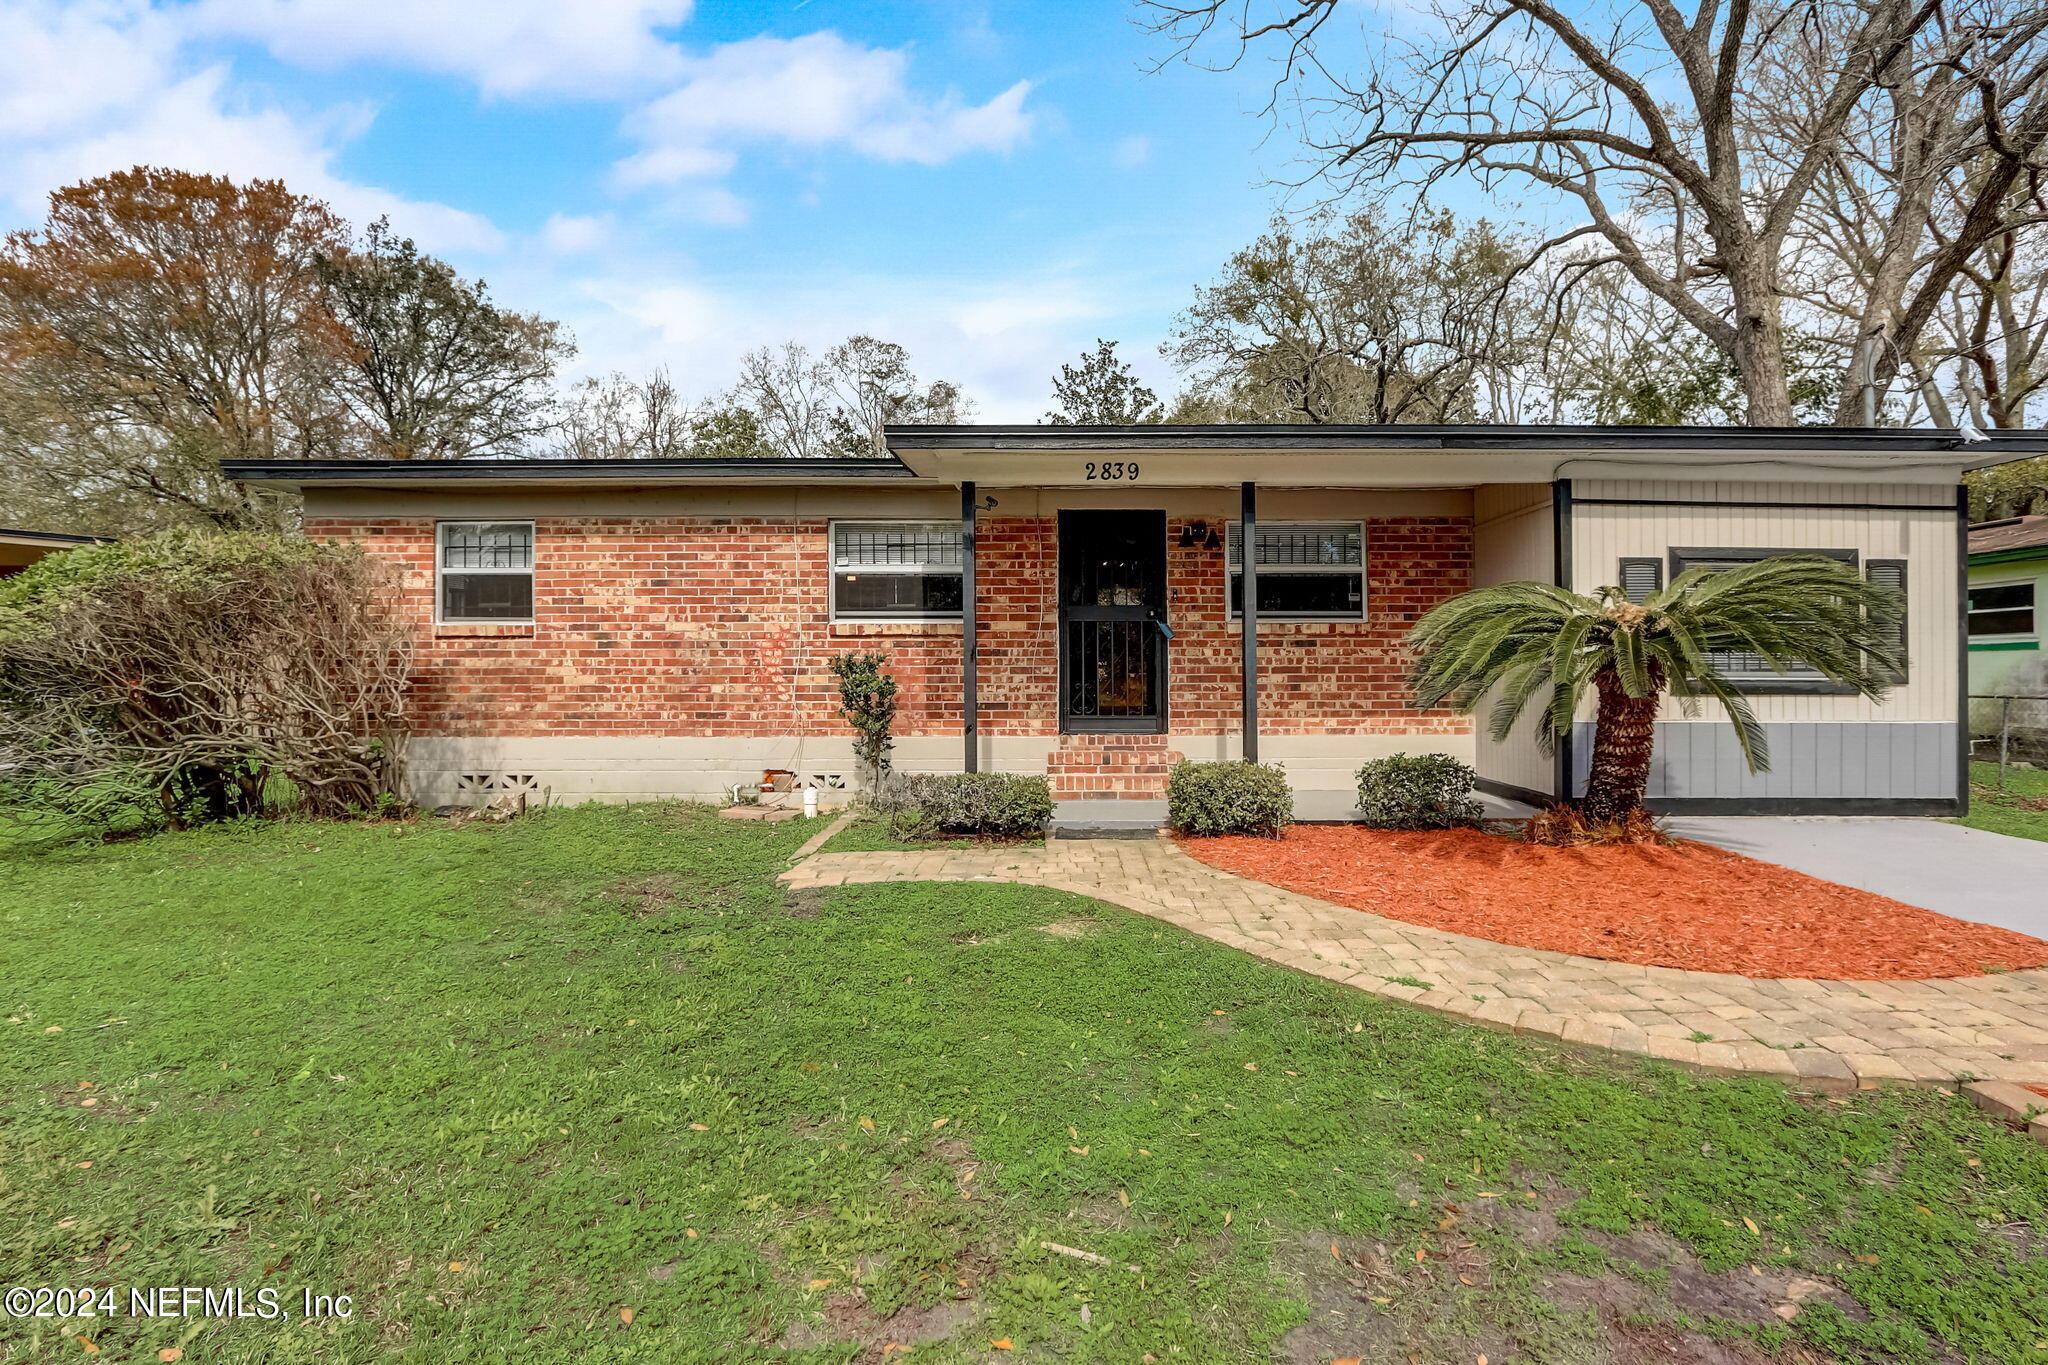 Jacksonville, FL home for sale located at 2839 W 9th Street, Jacksonville, FL 32254